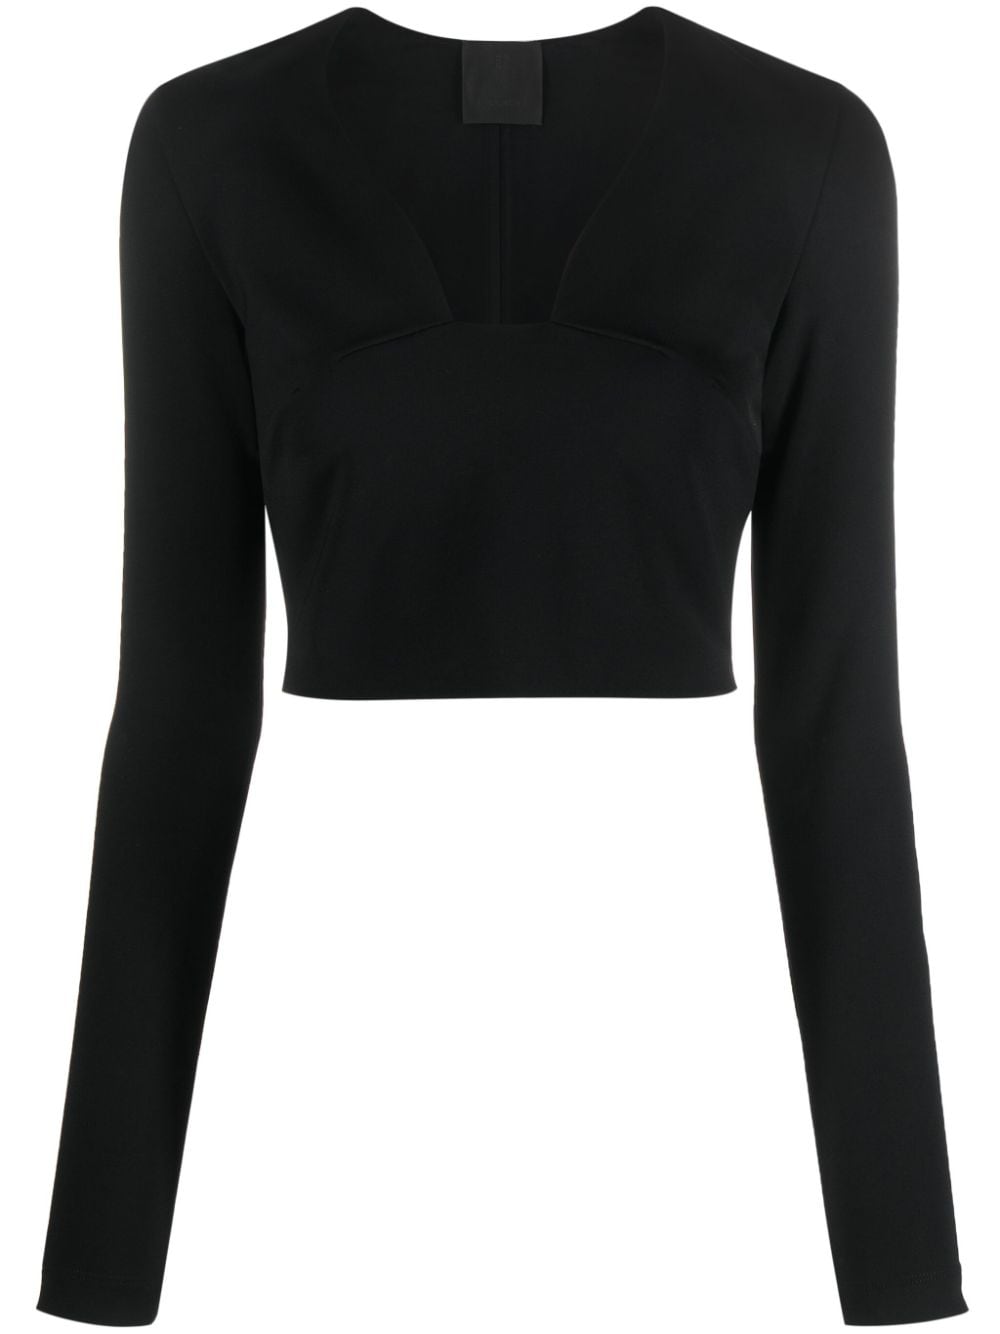 Givenchy square-neck cropped top - Black von Givenchy